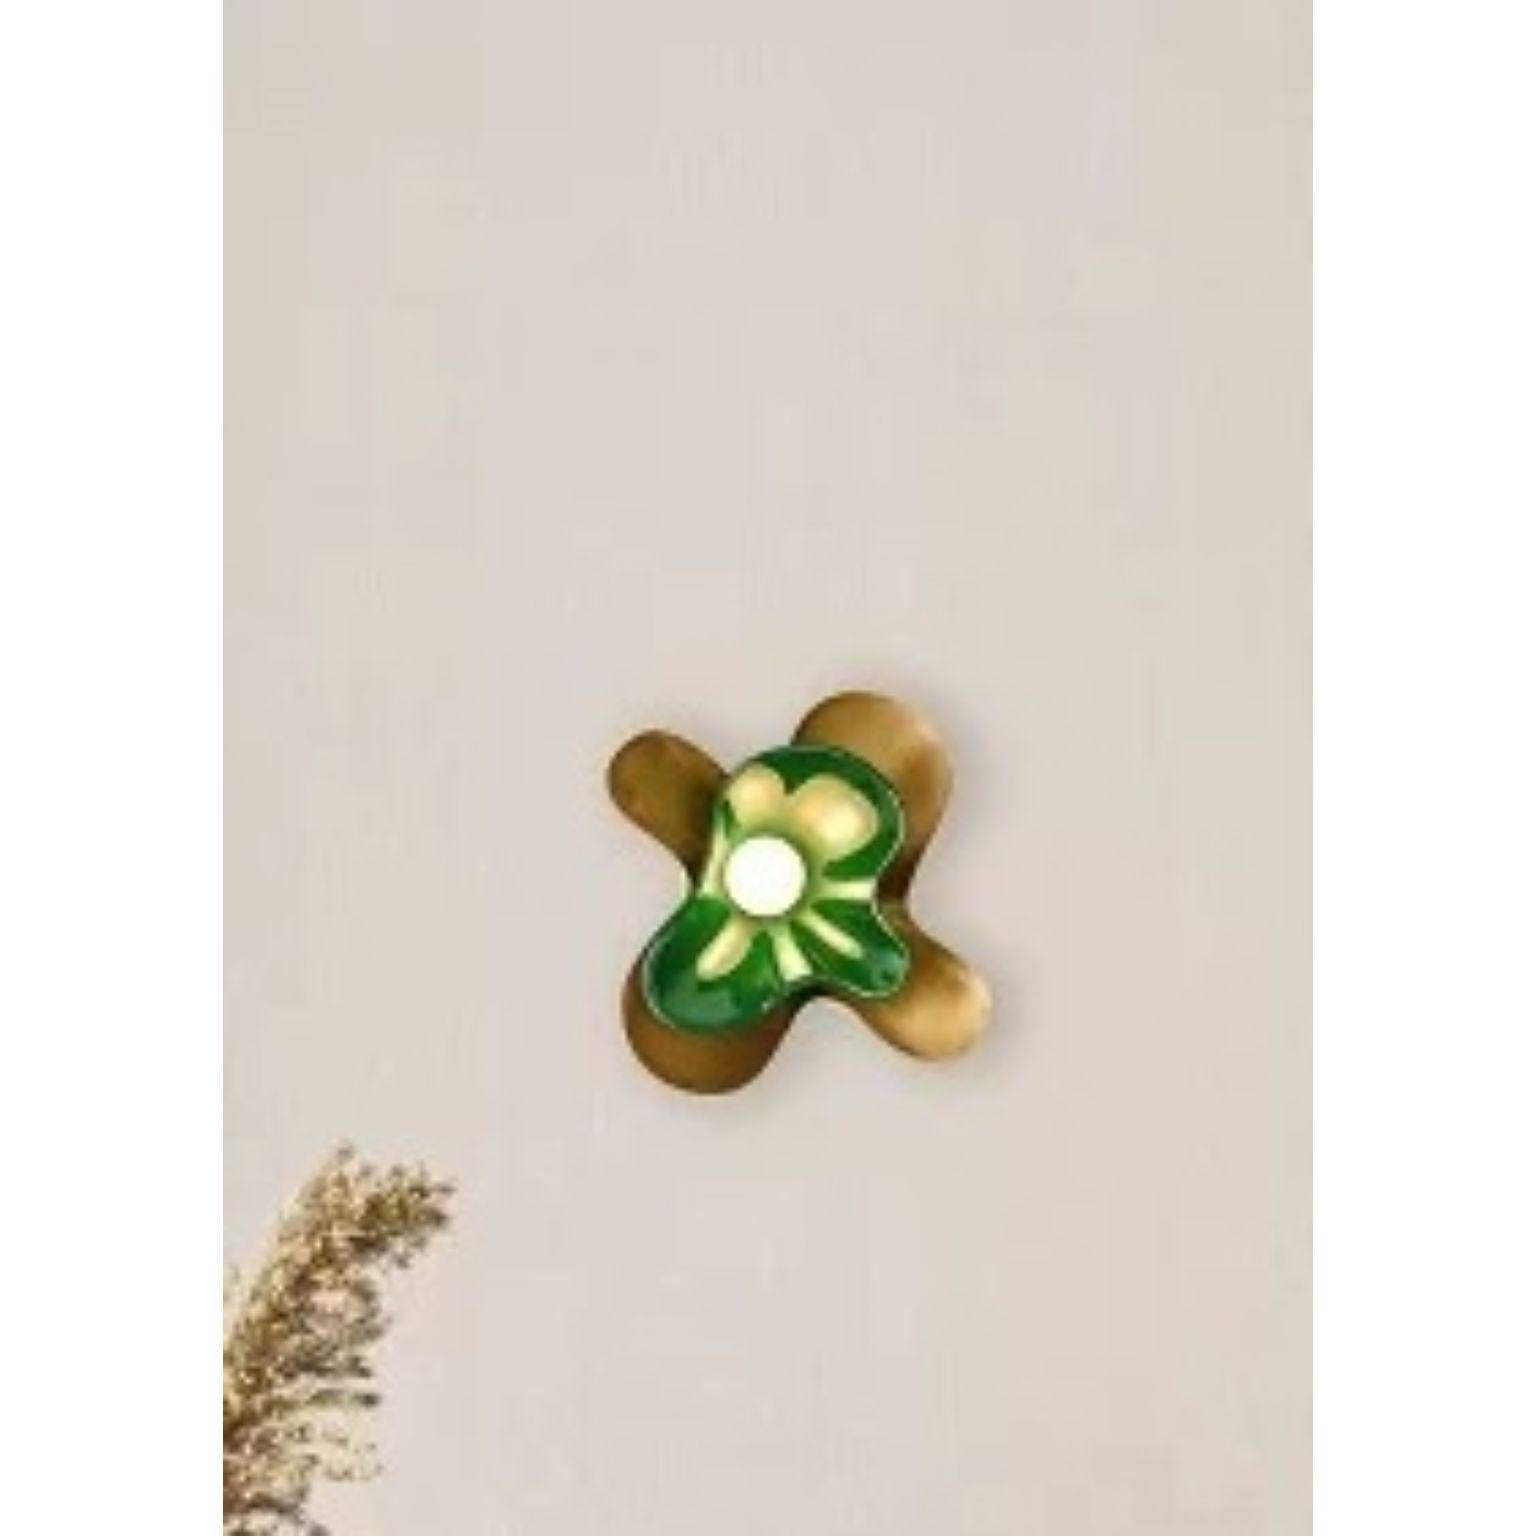 Green Butterfly Wall Sconce by Dainte
Dimensions: D 13.5 x W 28.5 x H 28 cm.
Materials: Glass and brass. 

The Butterfly wall sconce features an elegant silhouette modeled after the wings of a butterfly in motion. Layered textured brass and glass, a